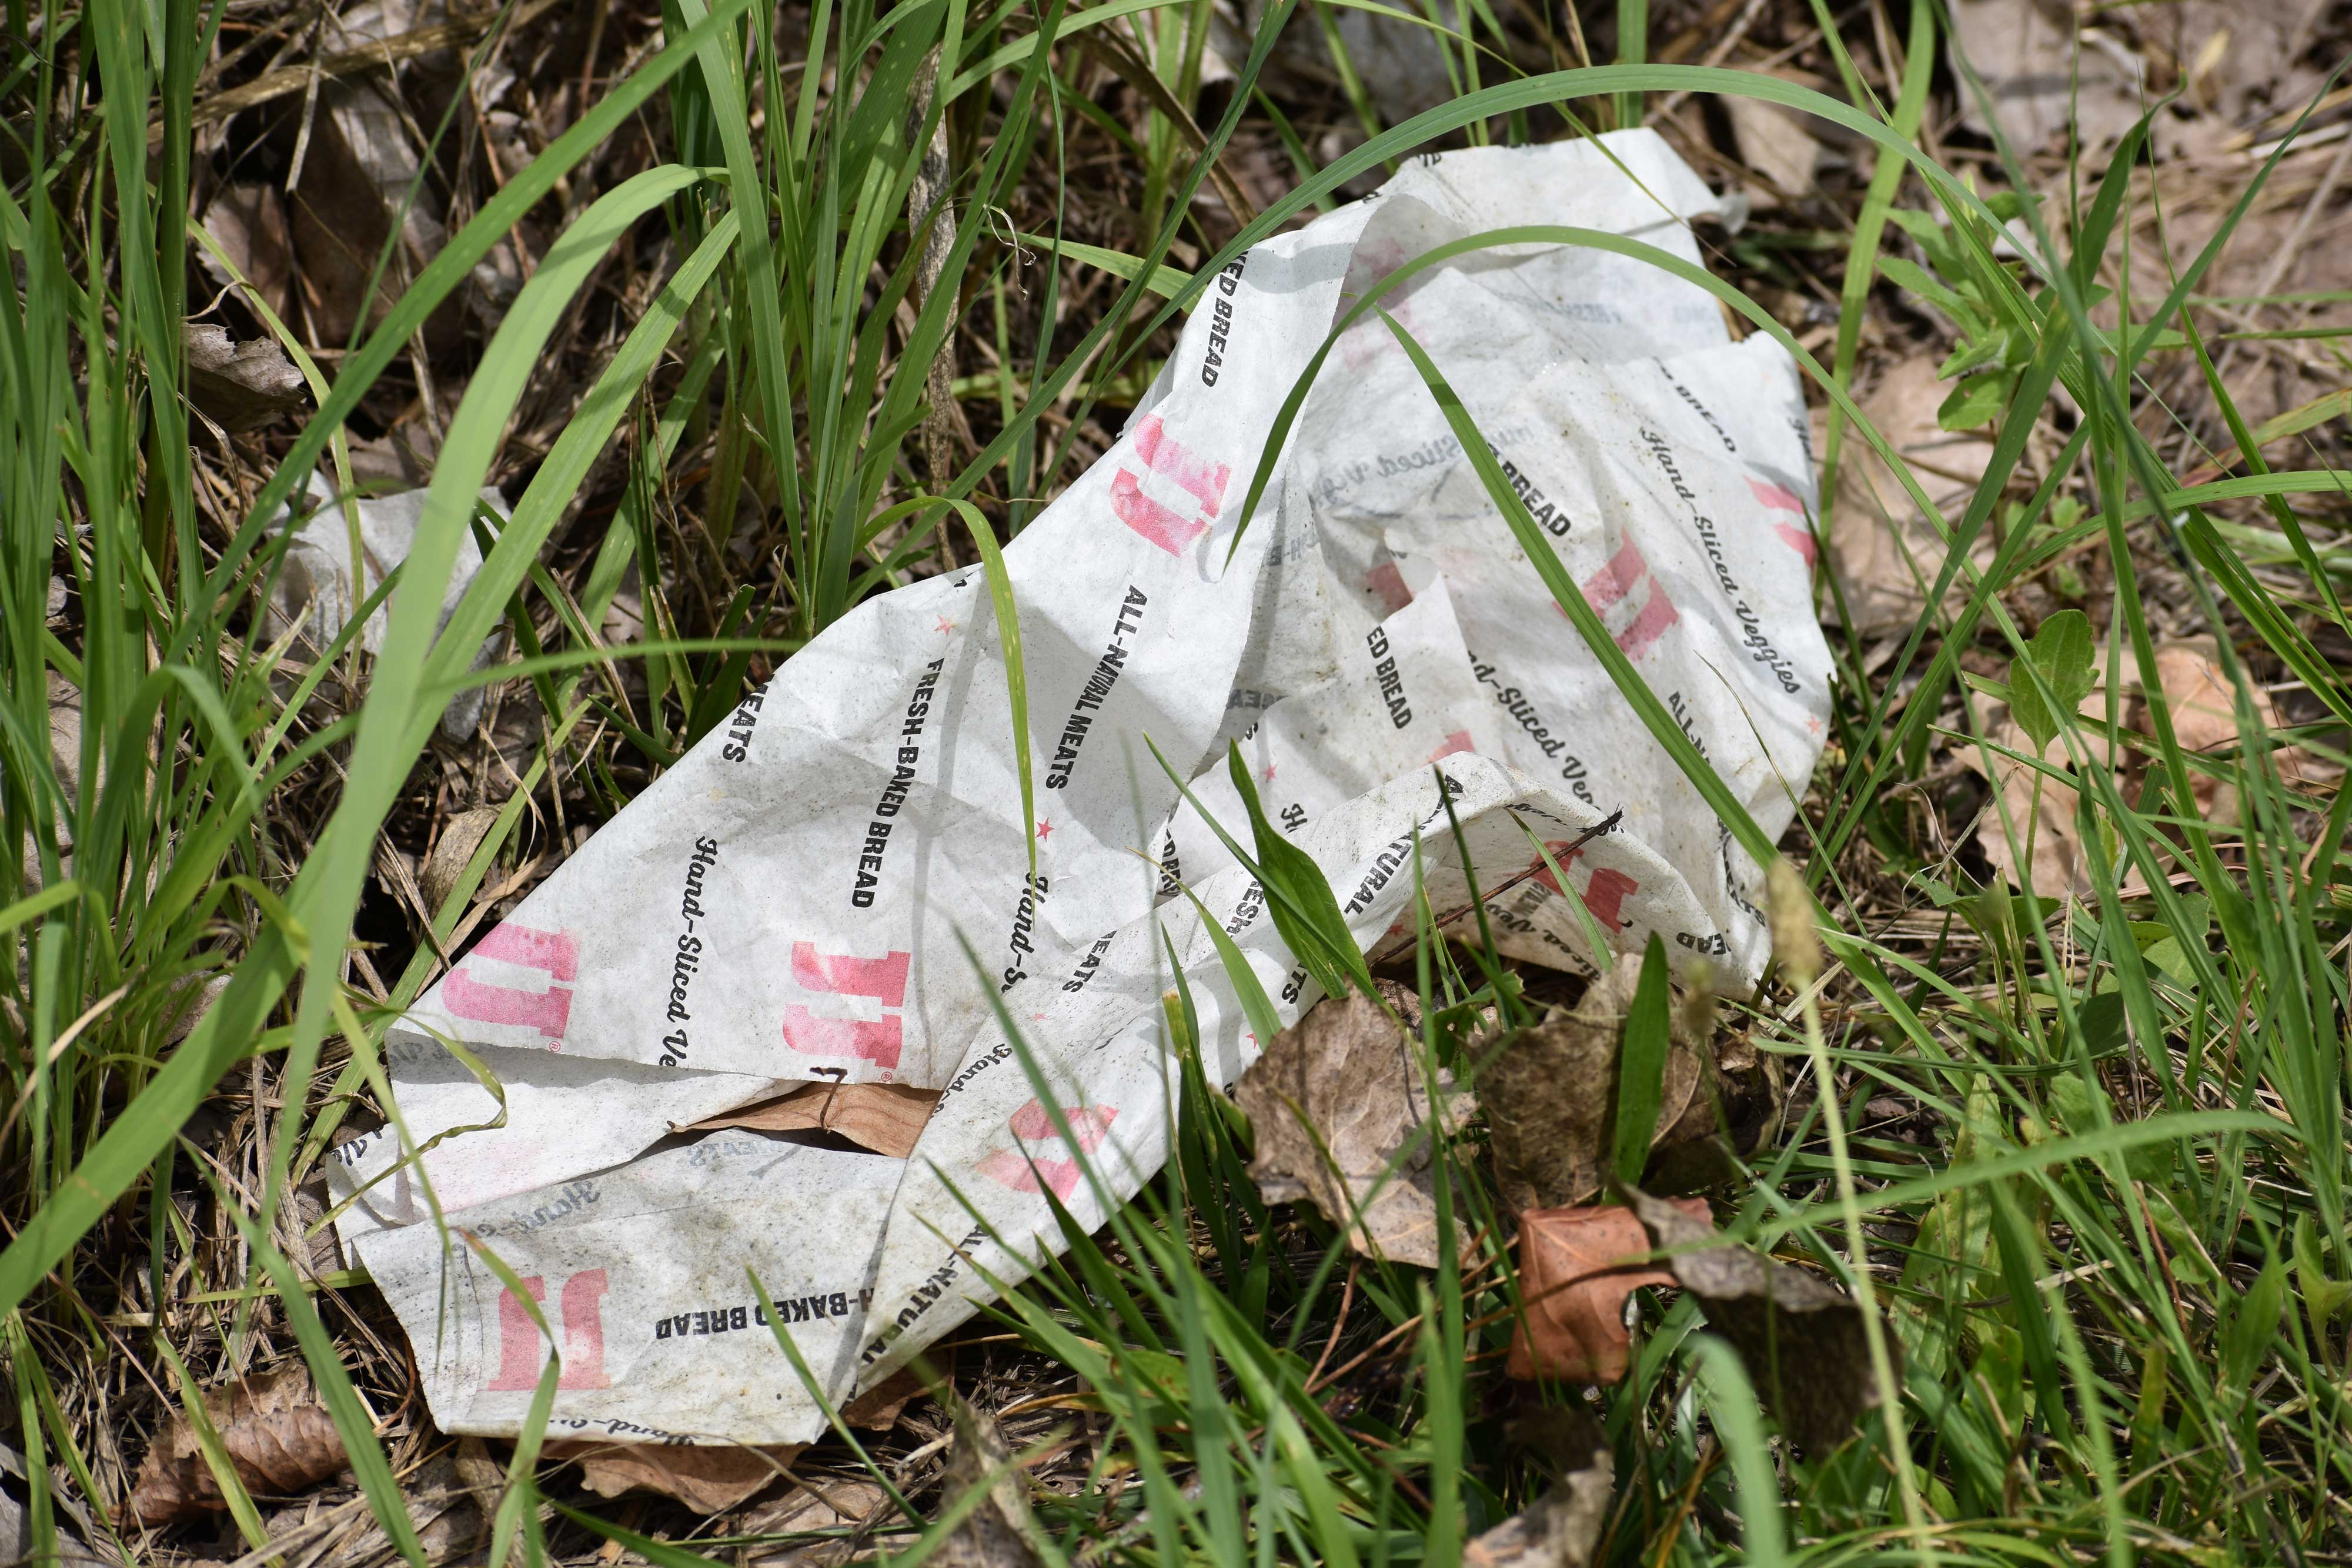 A piece of litter on the ground.